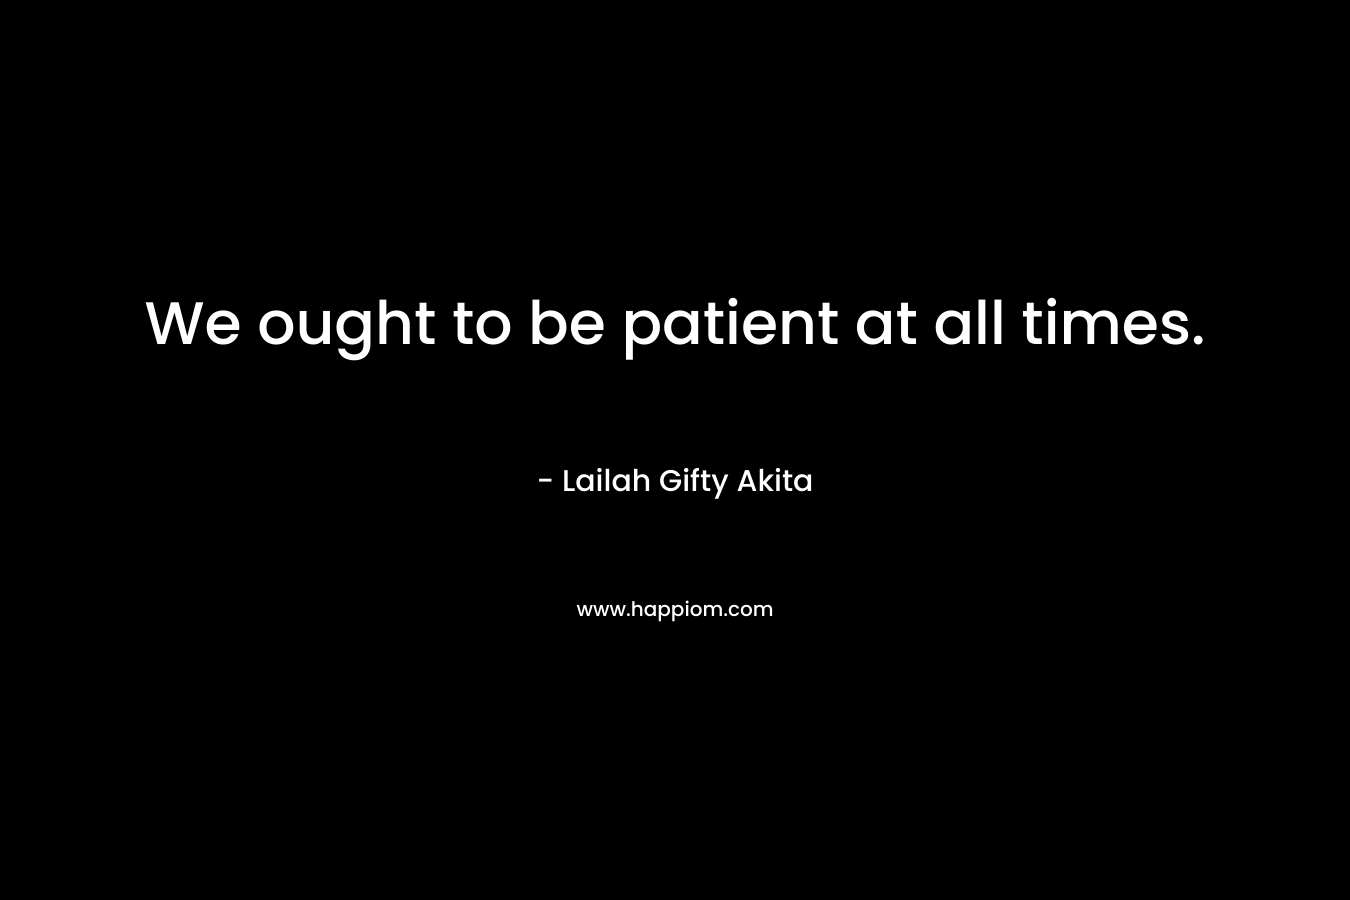 We ought to be patient at all times.